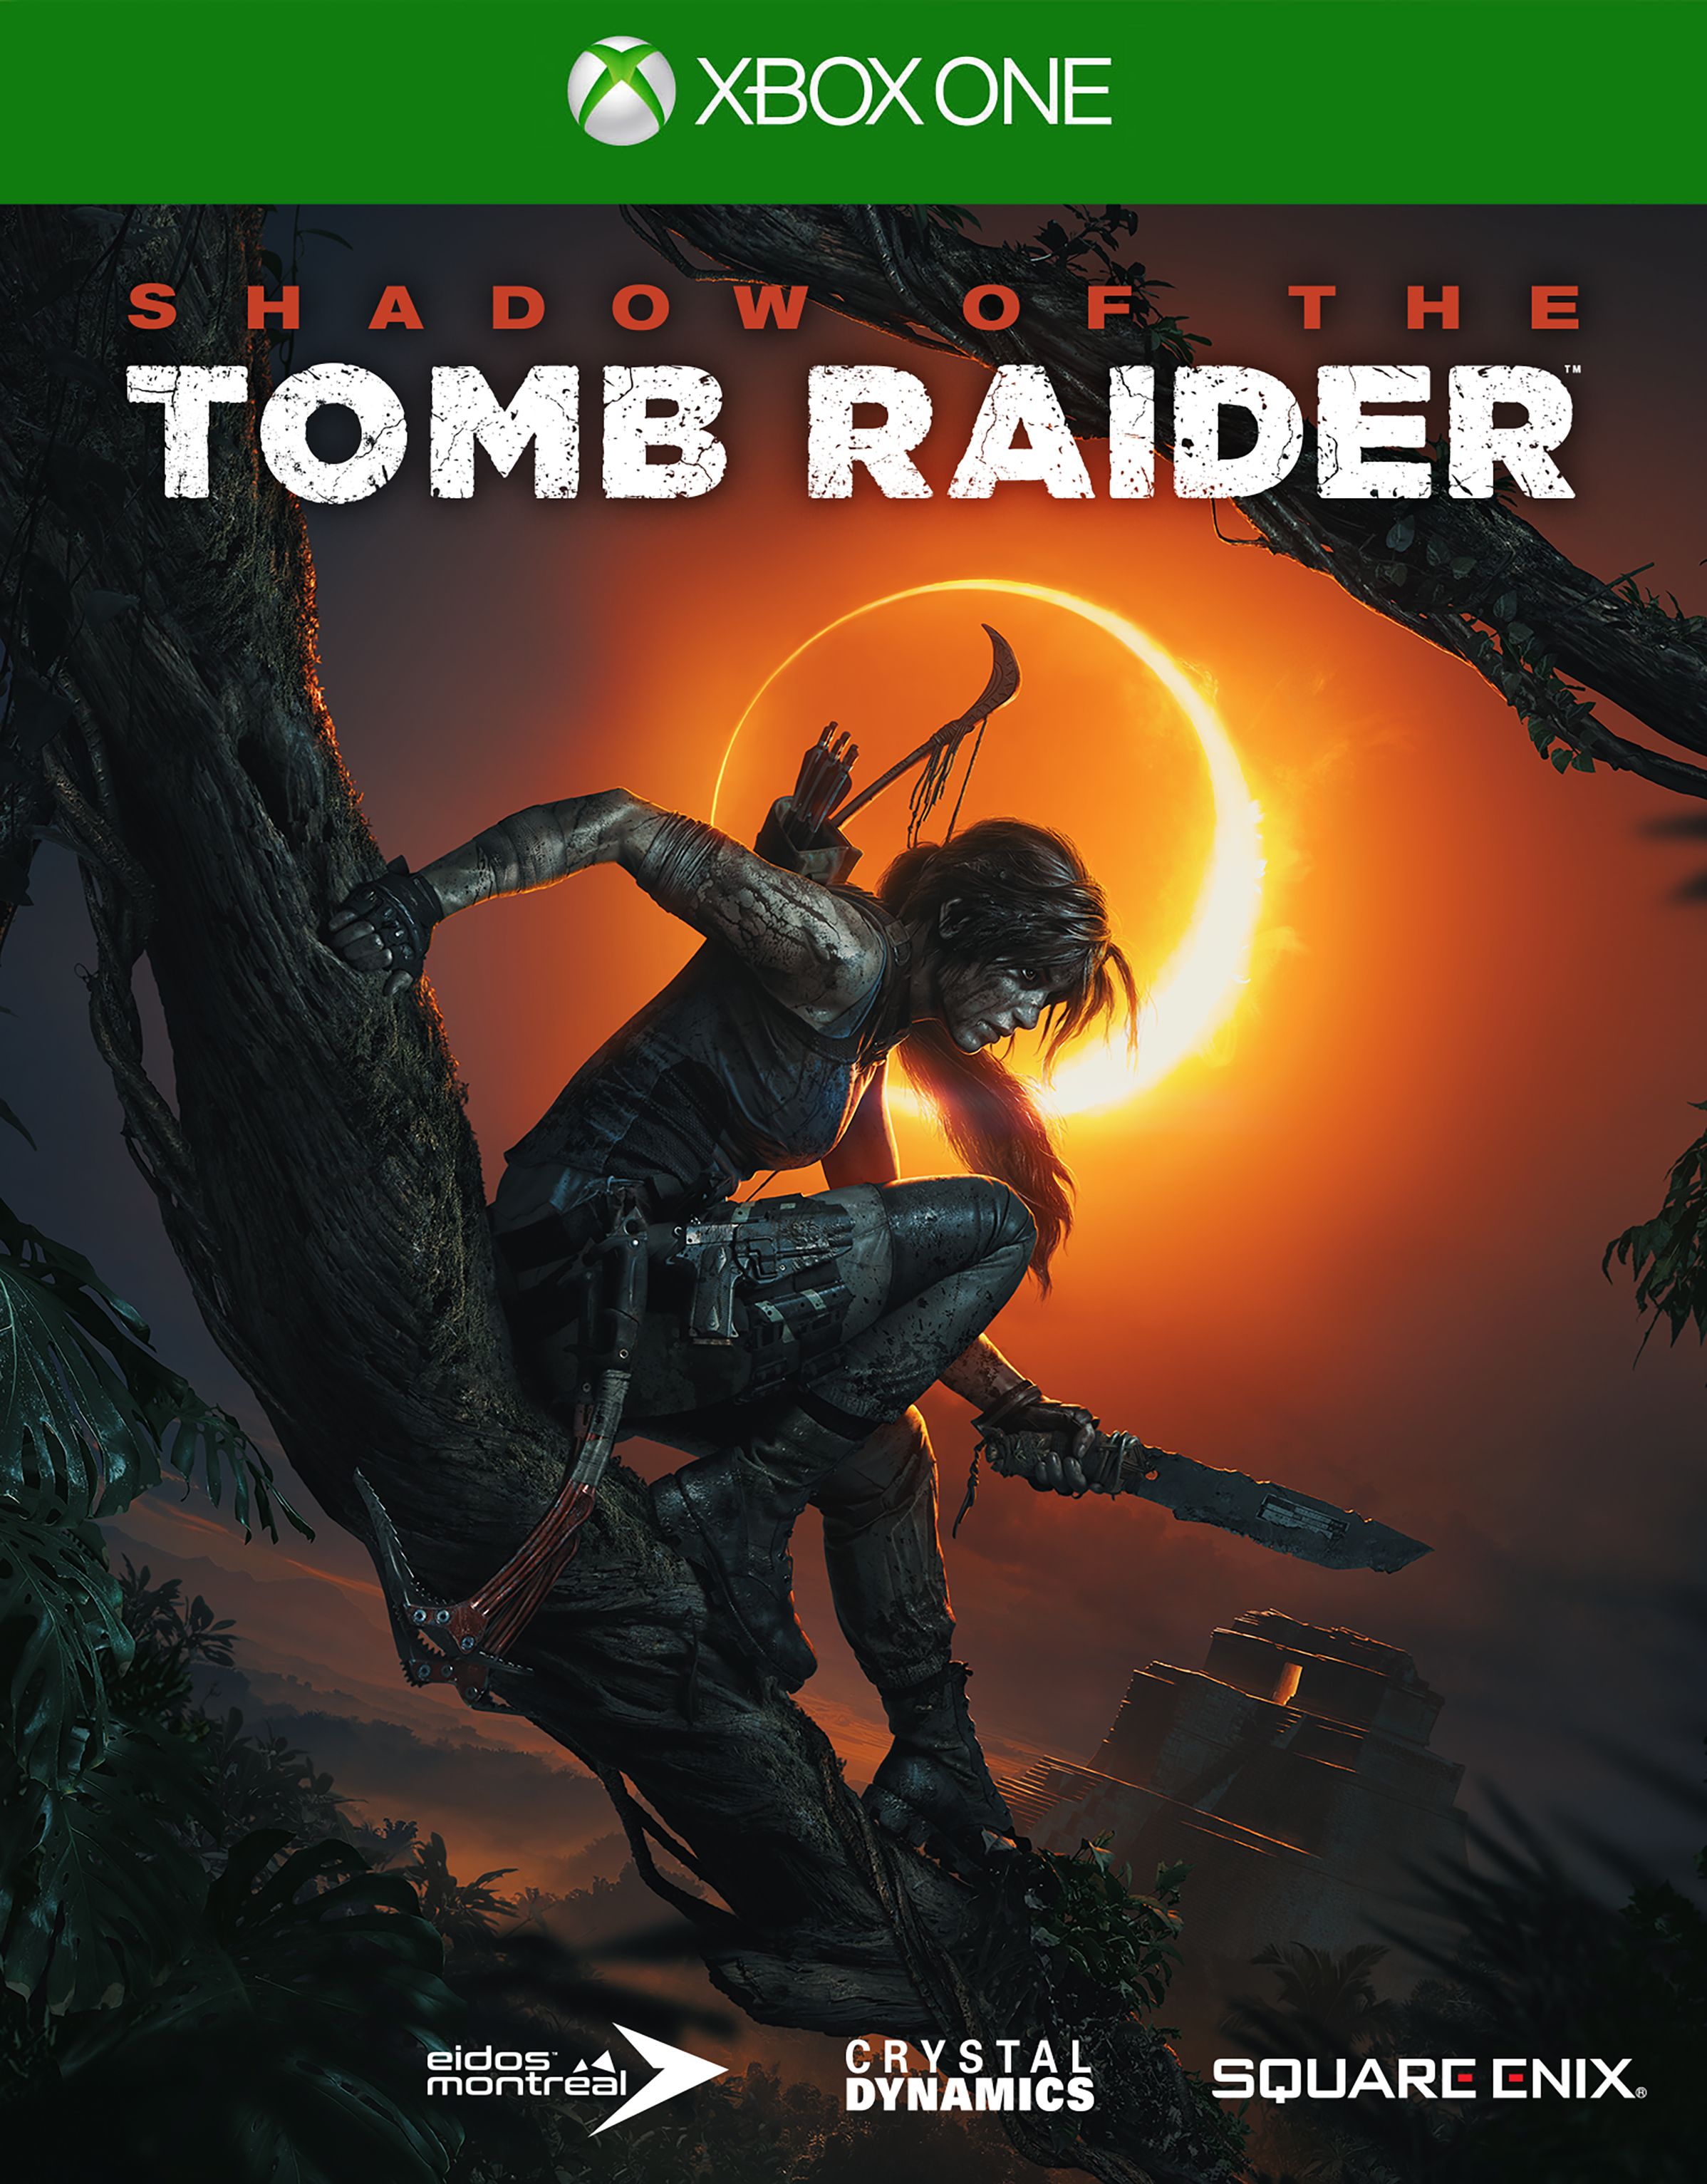 jaquette de Shadow of the Tomb Raider sur Xbox One